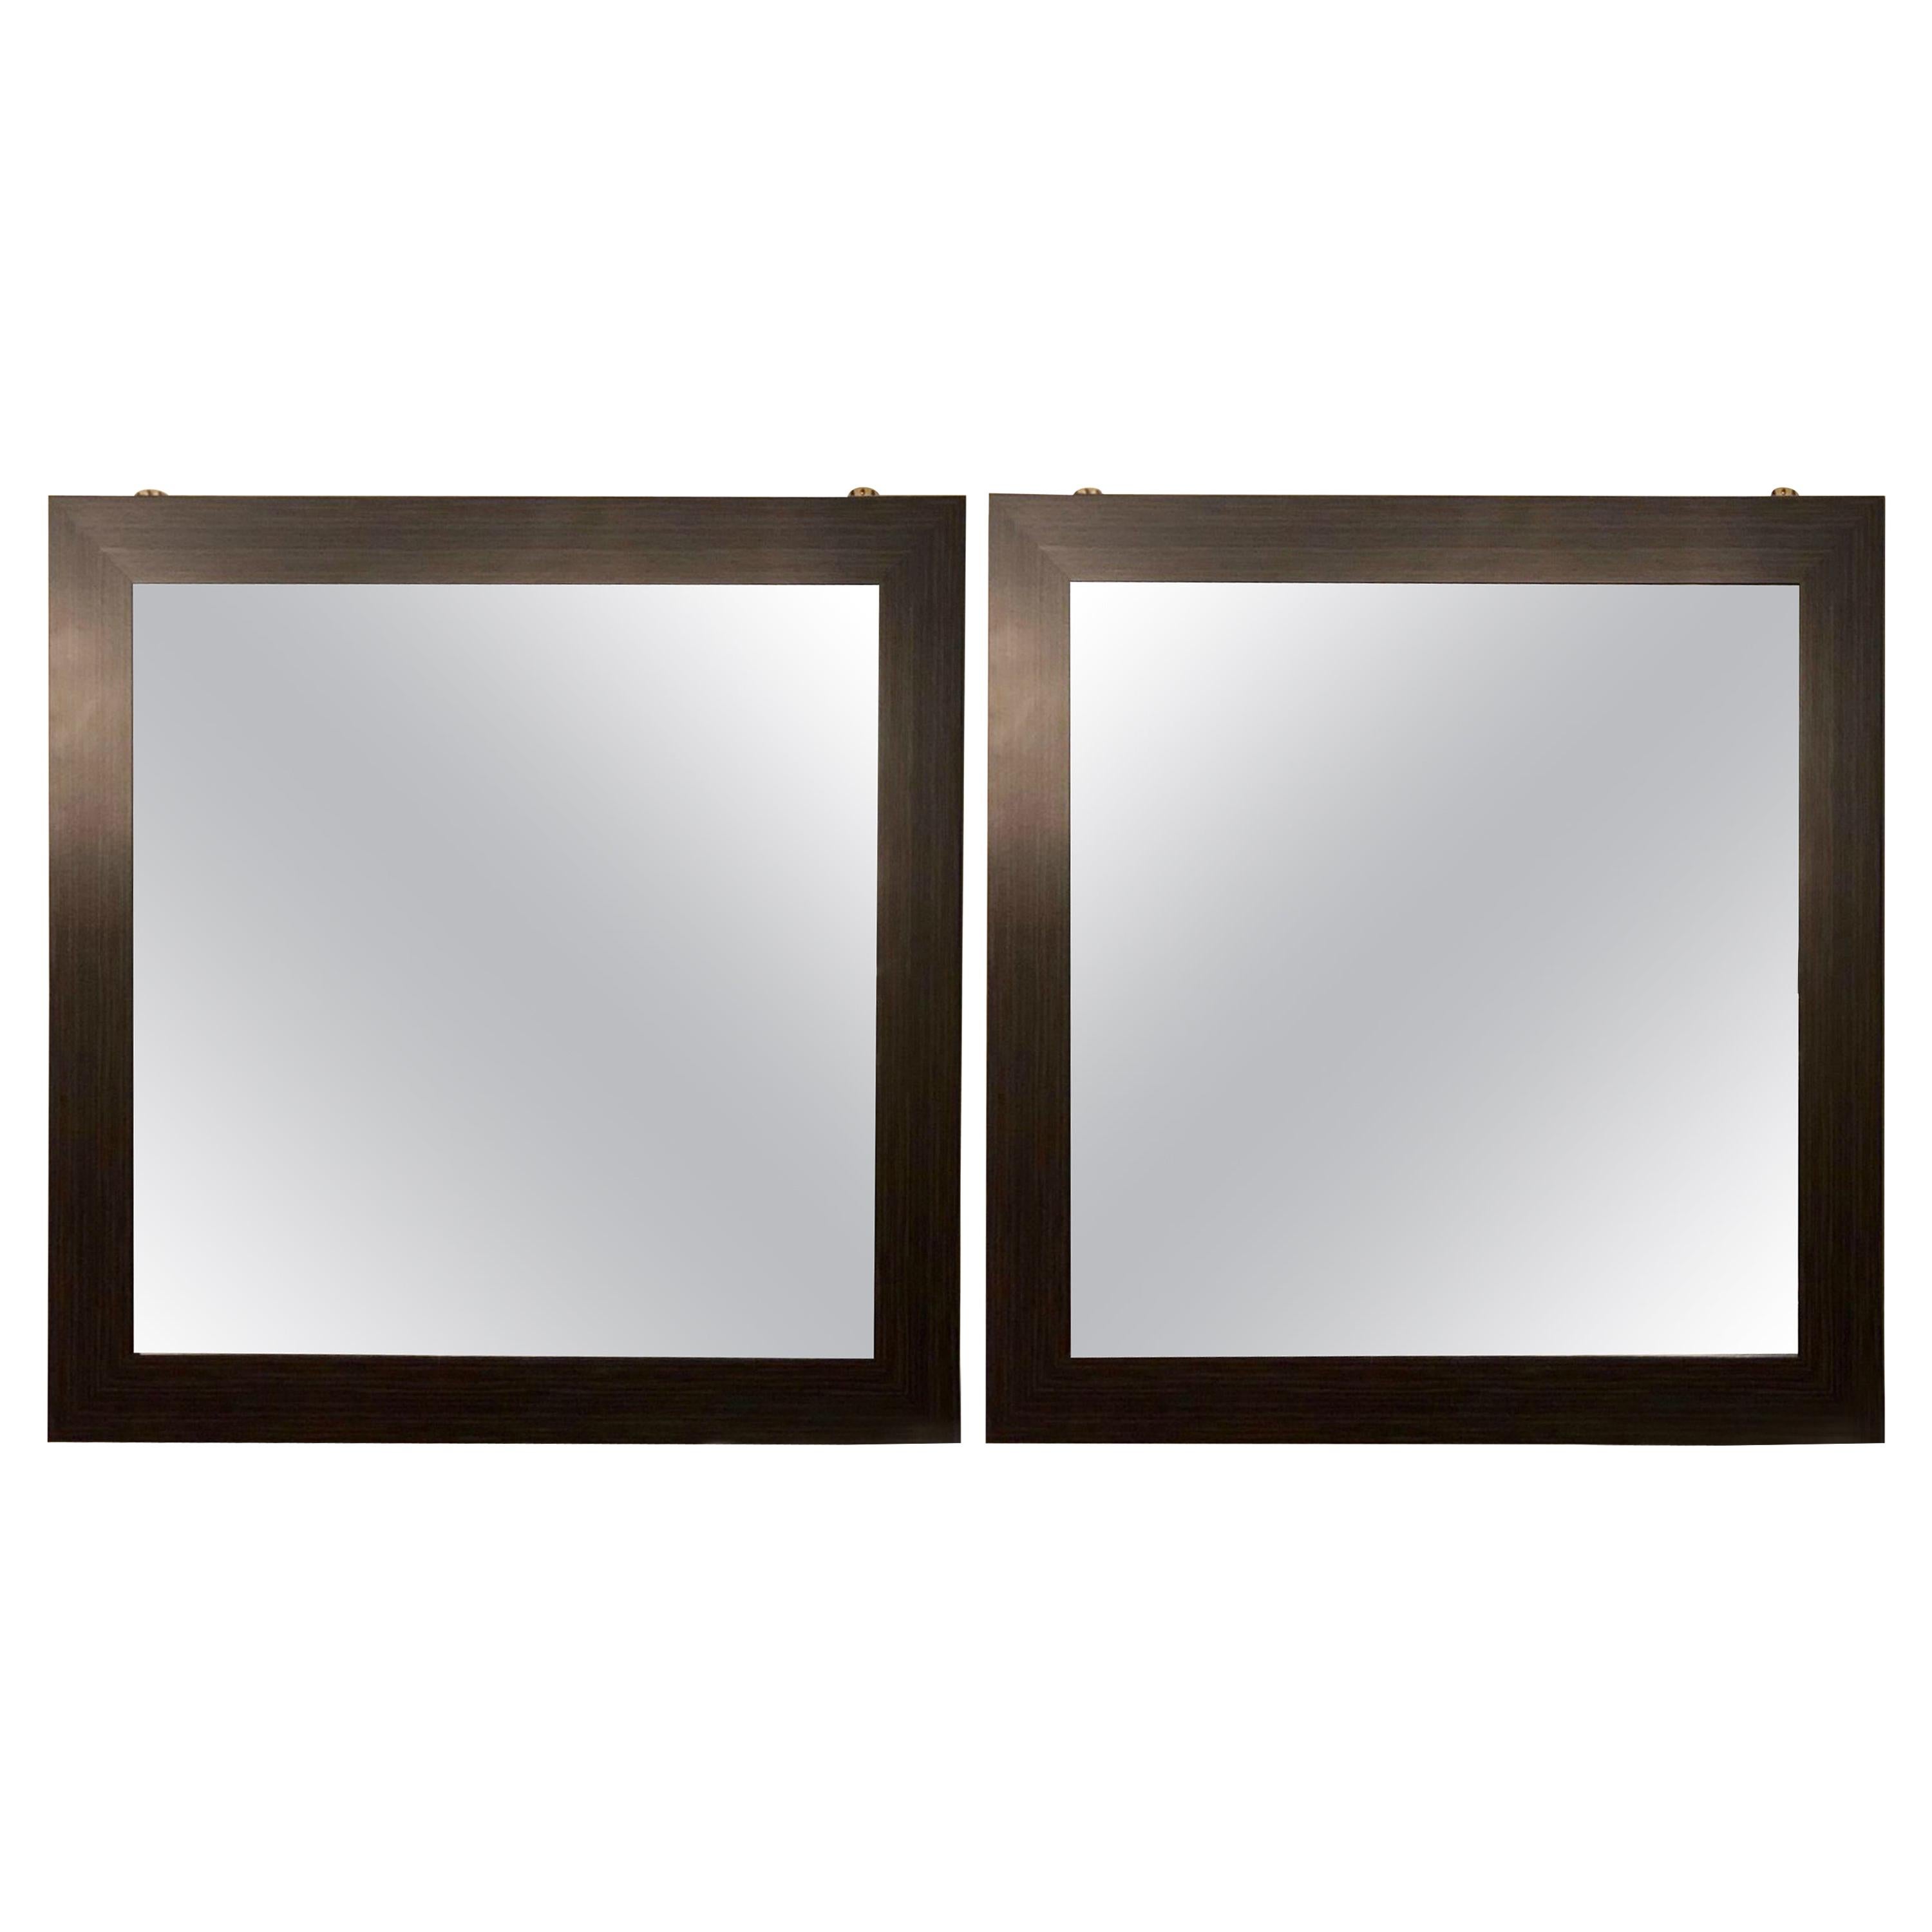 Pair of Art Deco style faux Macassar square console or wall mirrors. Purchased from a hotel in France we have one dozen of these squarish wall or console mirrors. Each having an etched circular in the center of the clear mirror set in a rosewood or